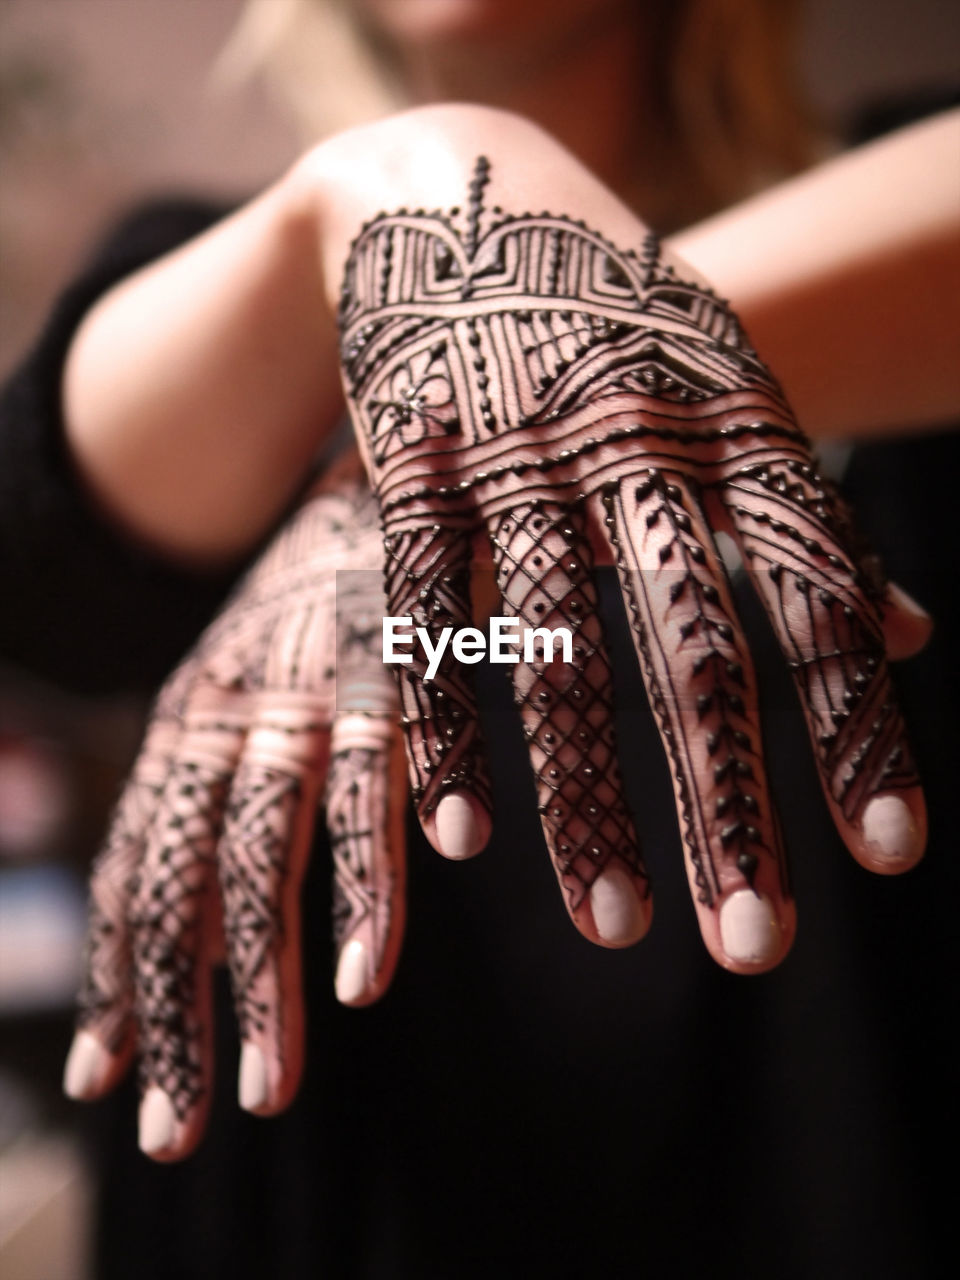 Midsection of woman with henna tattoos on hands